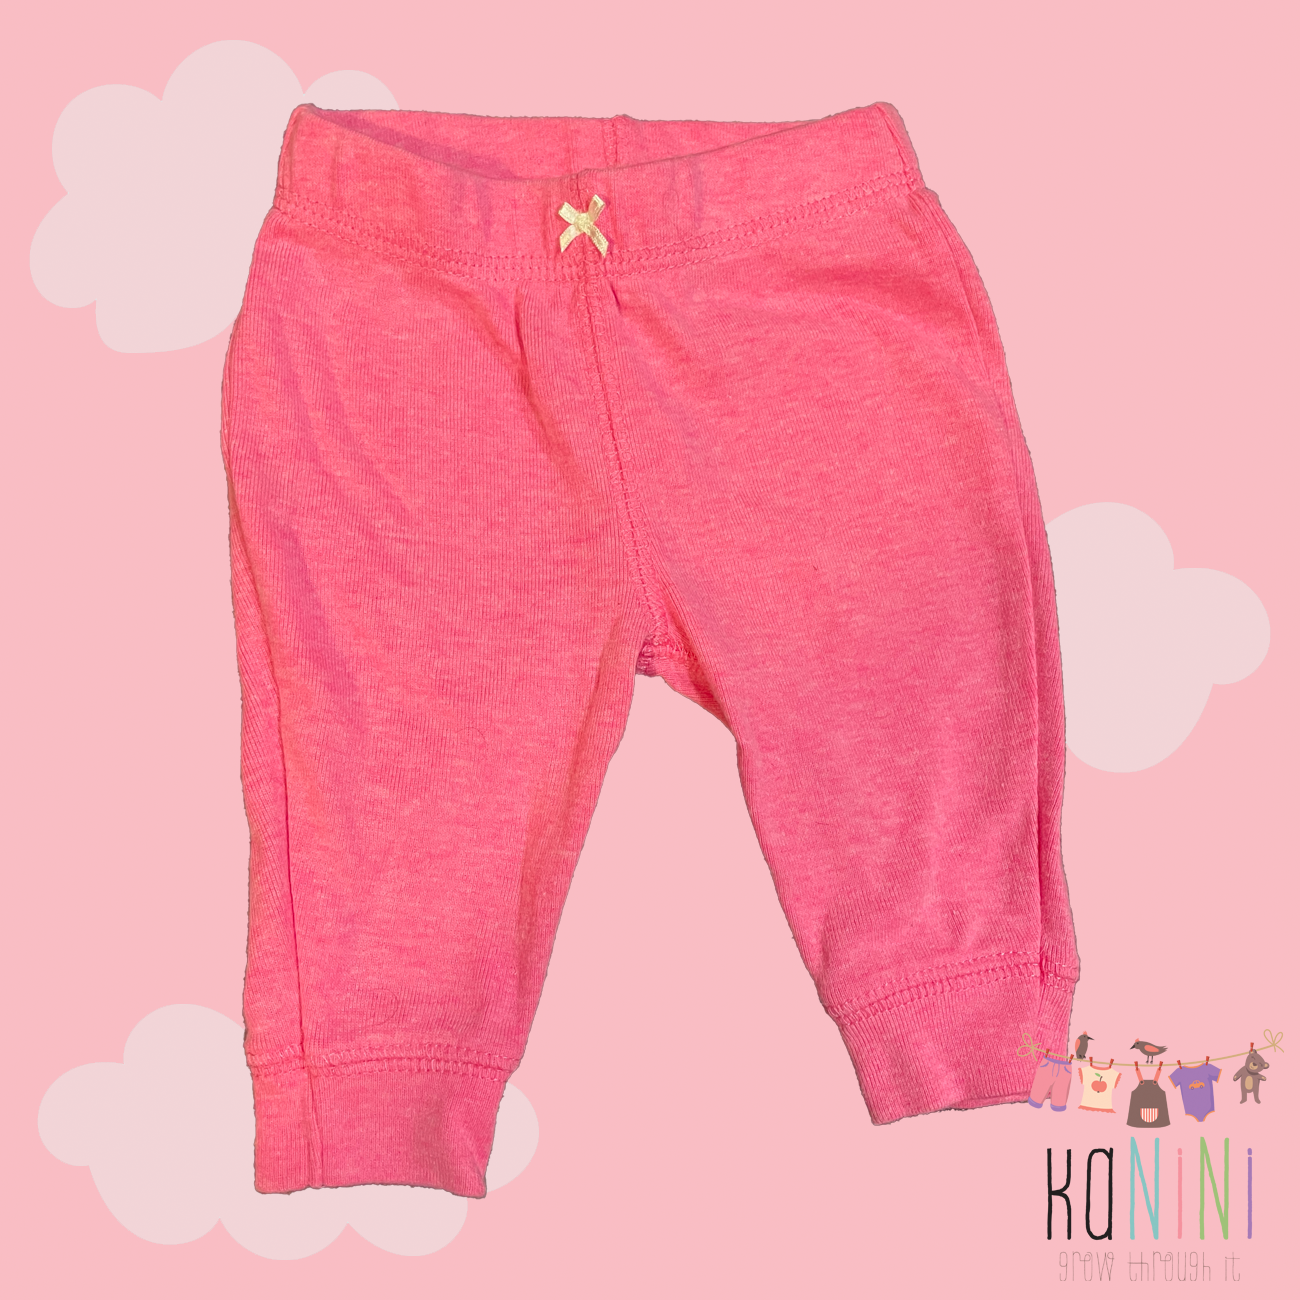 Featured image for “Carter's Newborn Girls Pink Leggings”